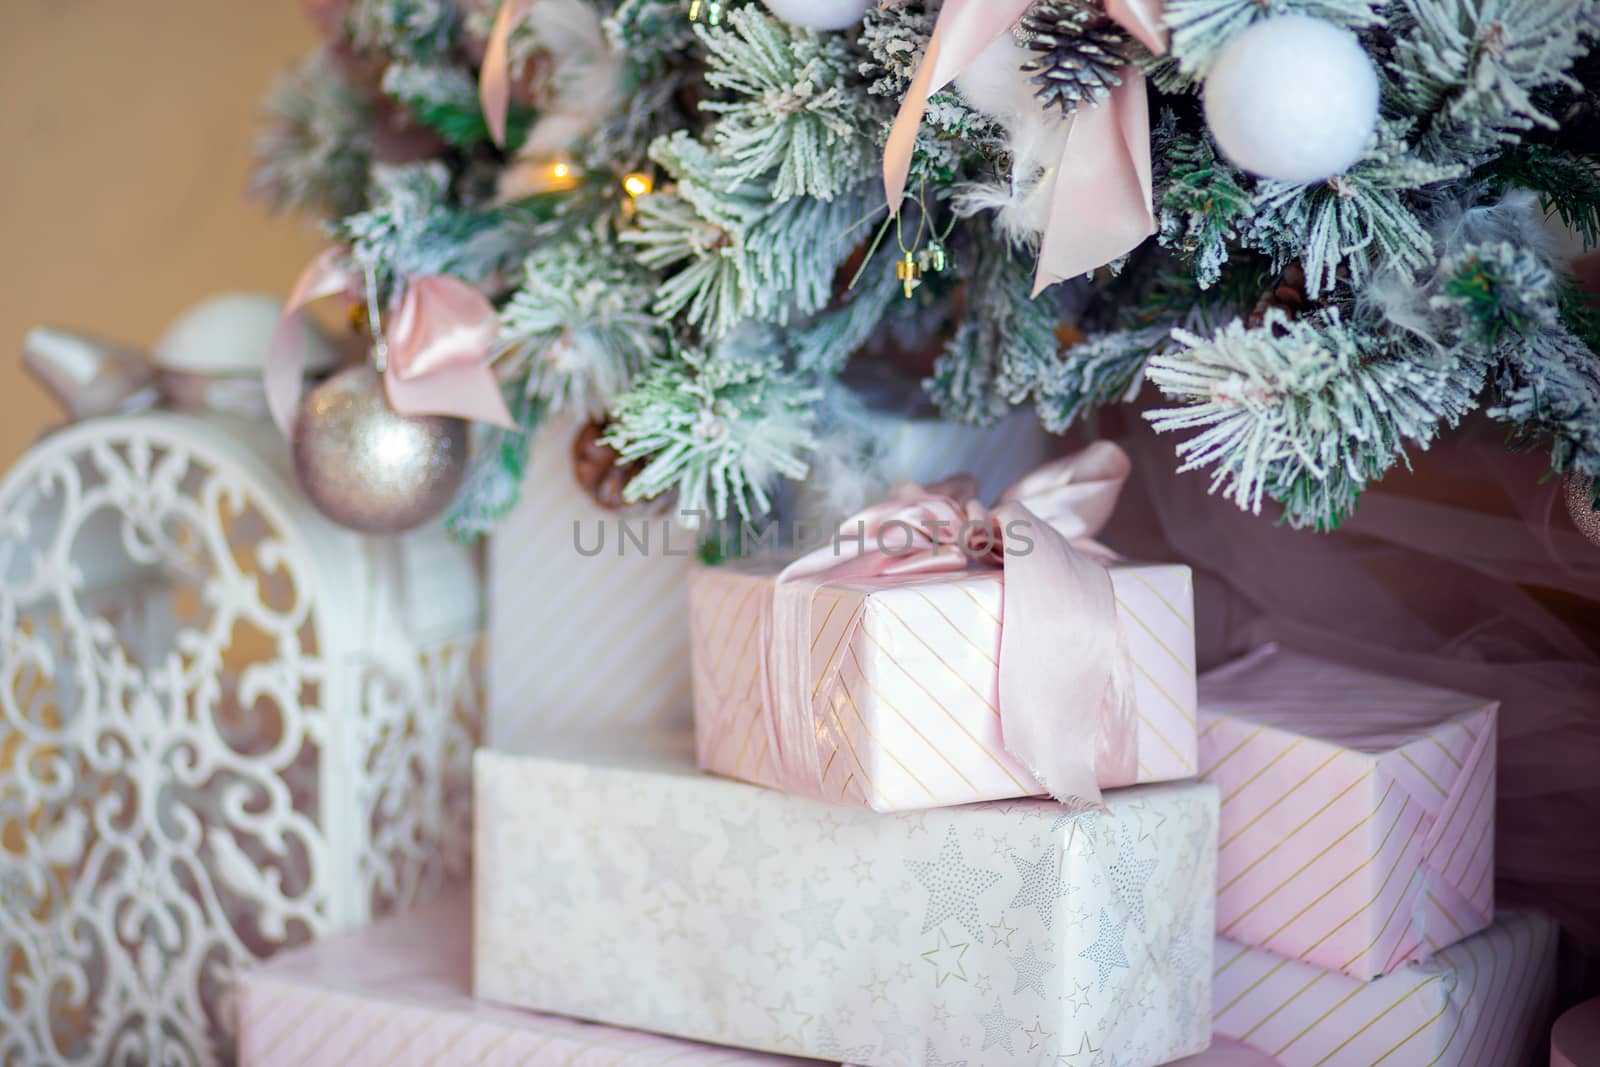 Beautifully wrapped gifts lie under a Christmas tree decorated in a modern twist in soft pink